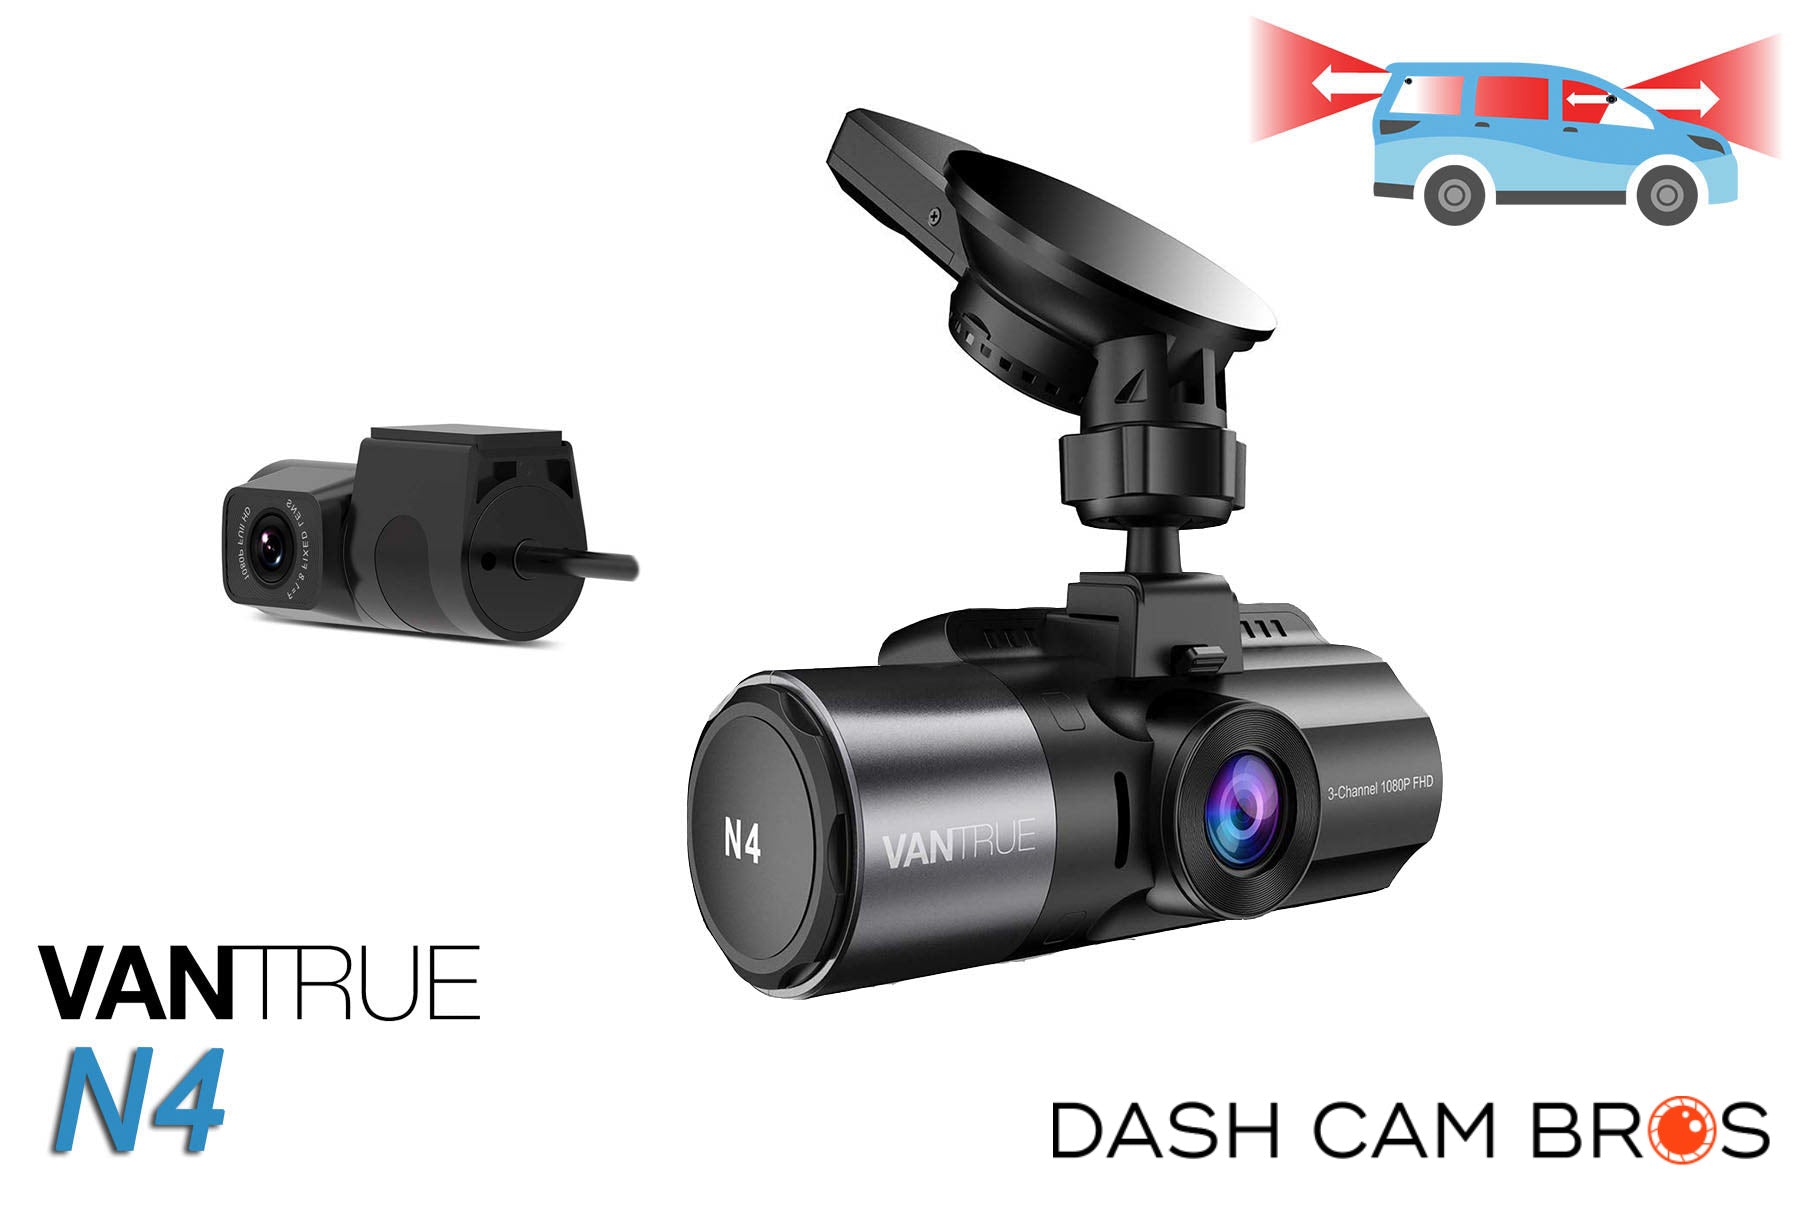  3 Channel Dash Cam Front and Rear Inside, 1080P Dash Camera for  Cars with 64GB U3 SD Card, Dashcam Three Way Triple Car Camera with IR  Night Vision, Parking Monitor, WDR 